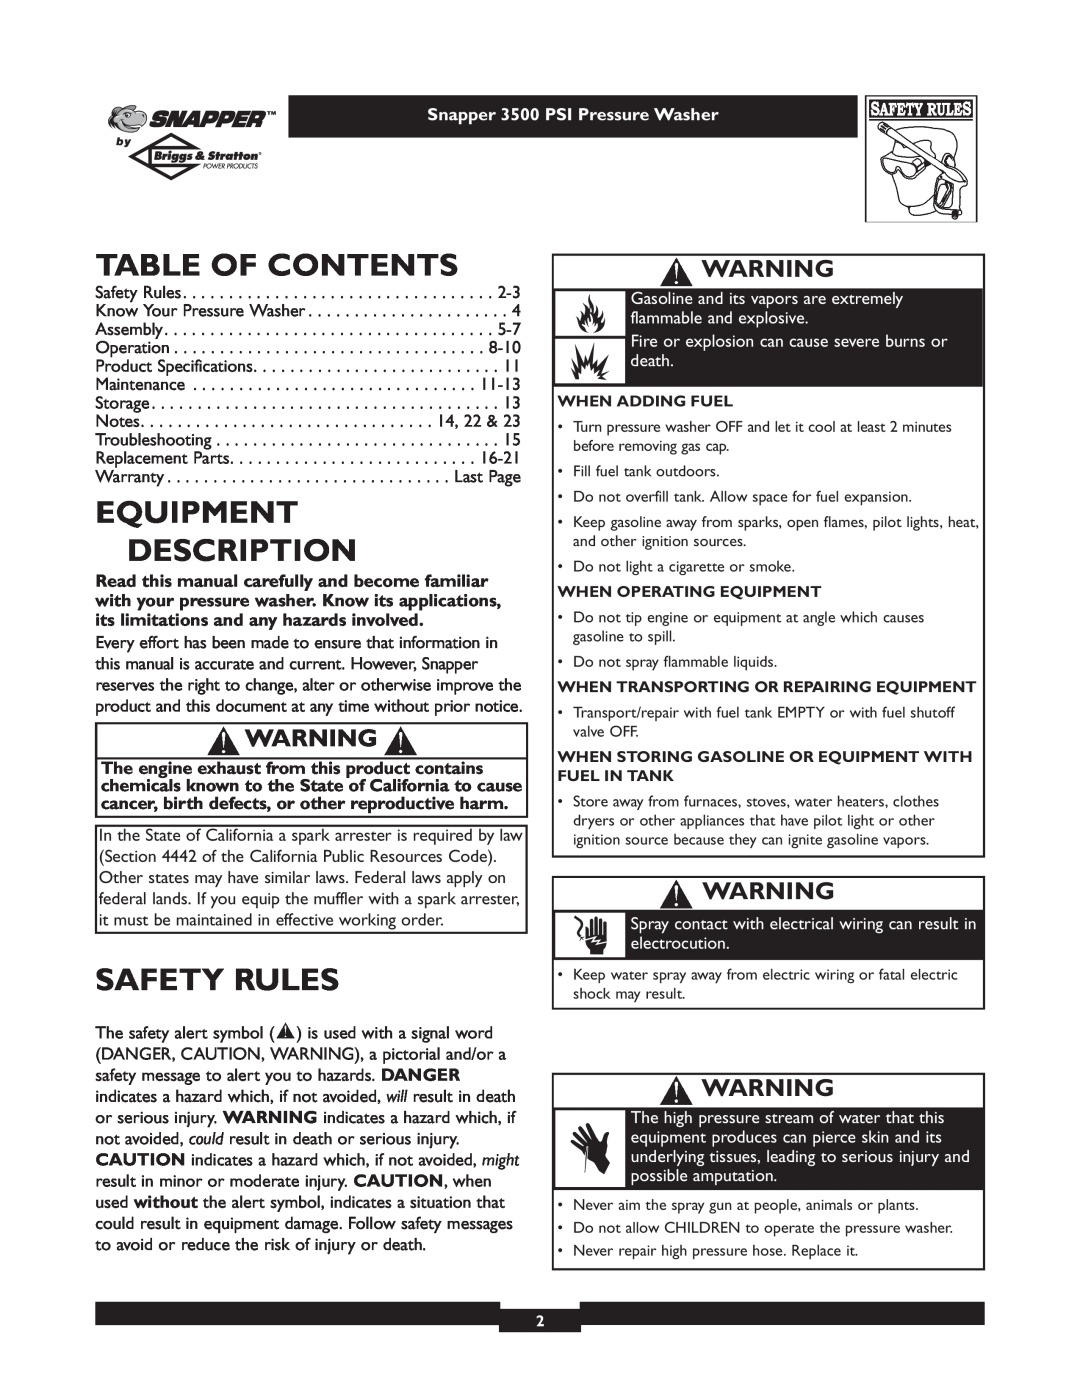 Briggs & Stratton 3500PSI manual Table Of Contents, Equipment Description, Safety Rules, Snapper 3500 PSI Pressure Washer 